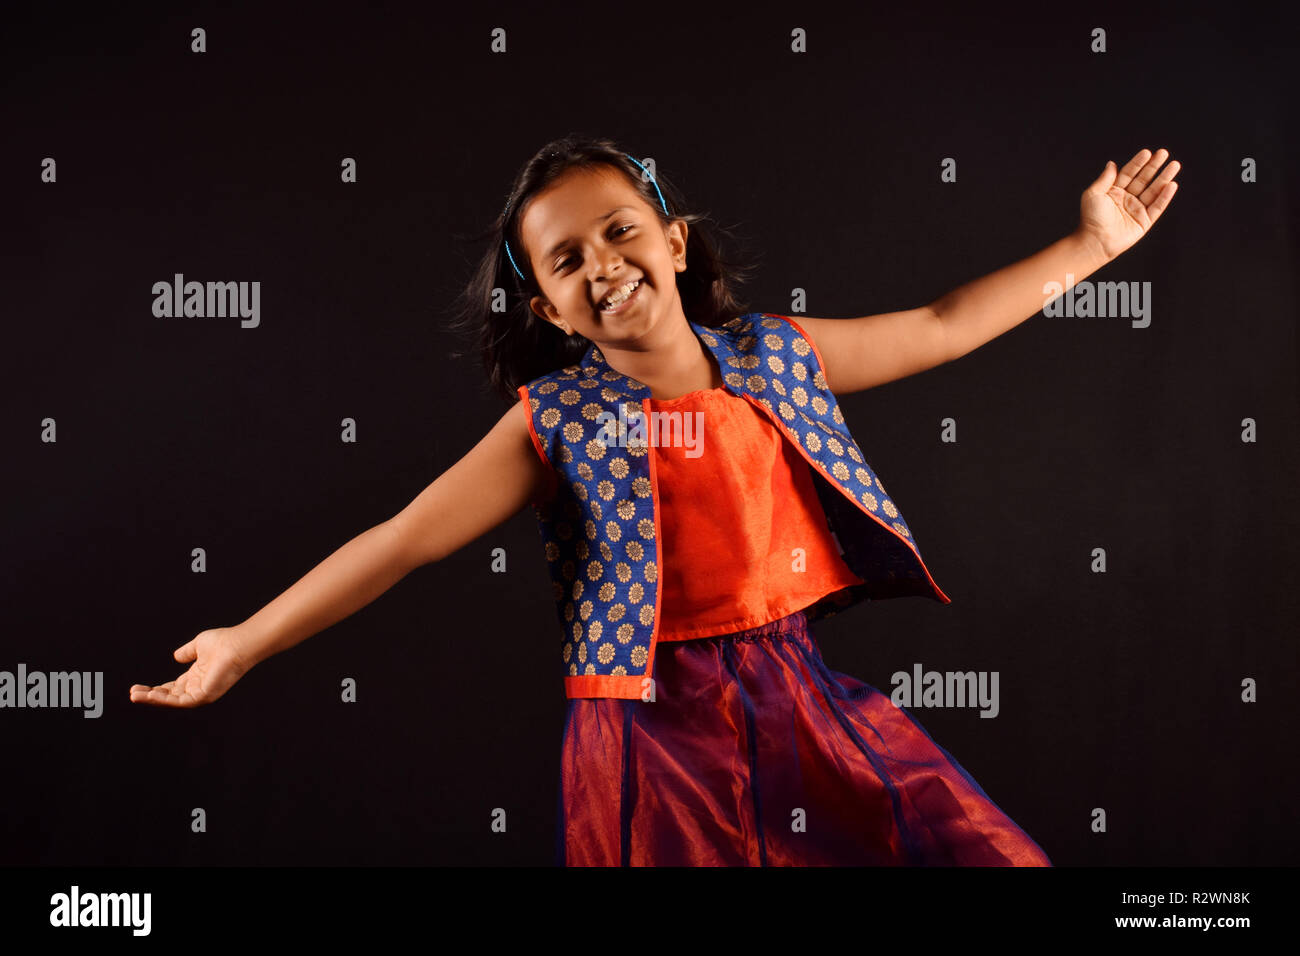 Little Girl in Indian attire with cute smile and outstretched arms posing in front of camera. Pune, Maharashtra Stock Photo